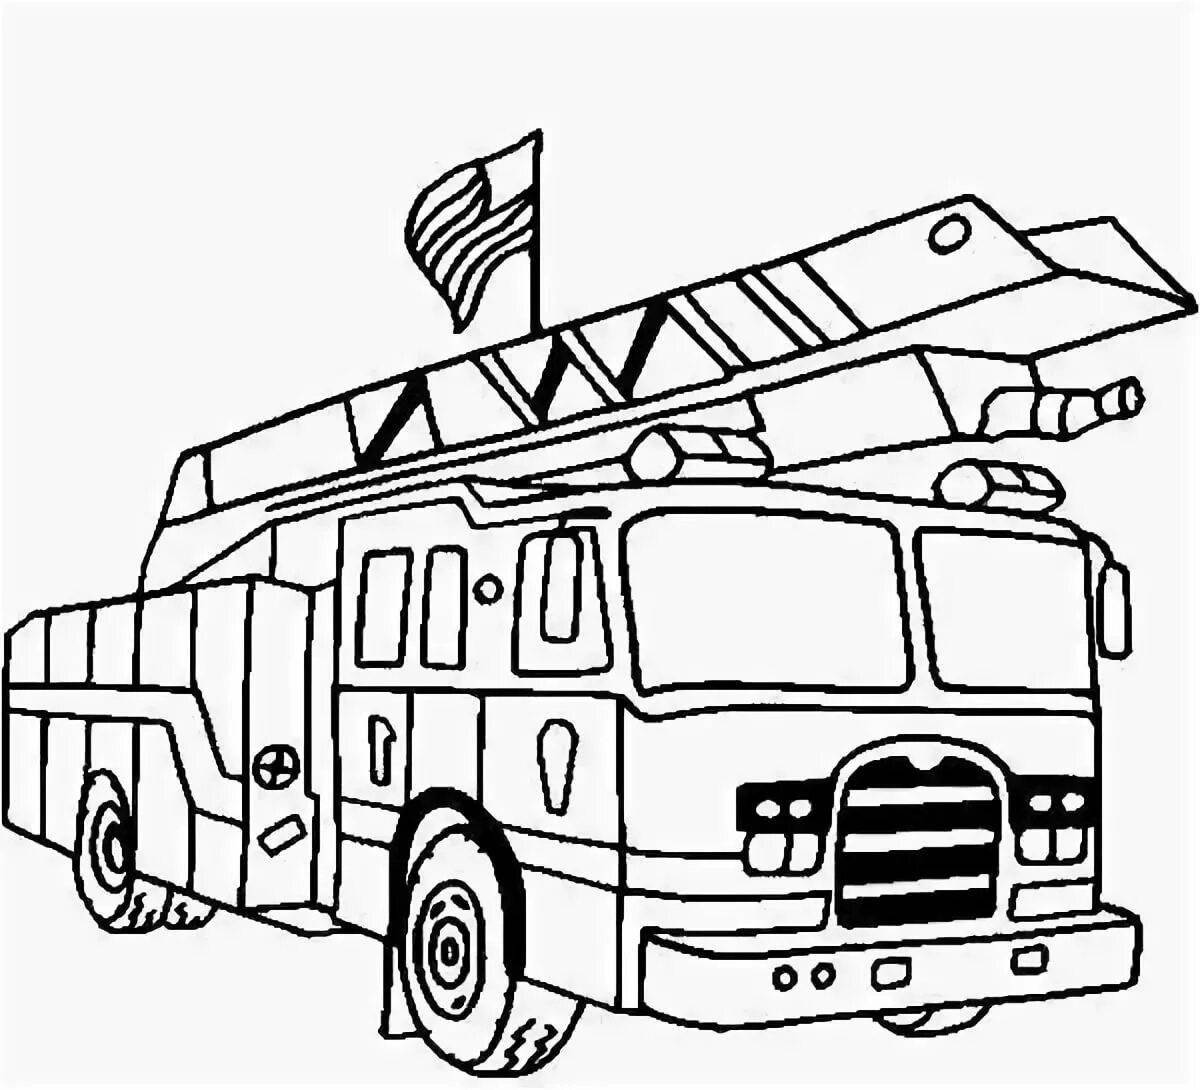 Cute fire truck coloring book for kids